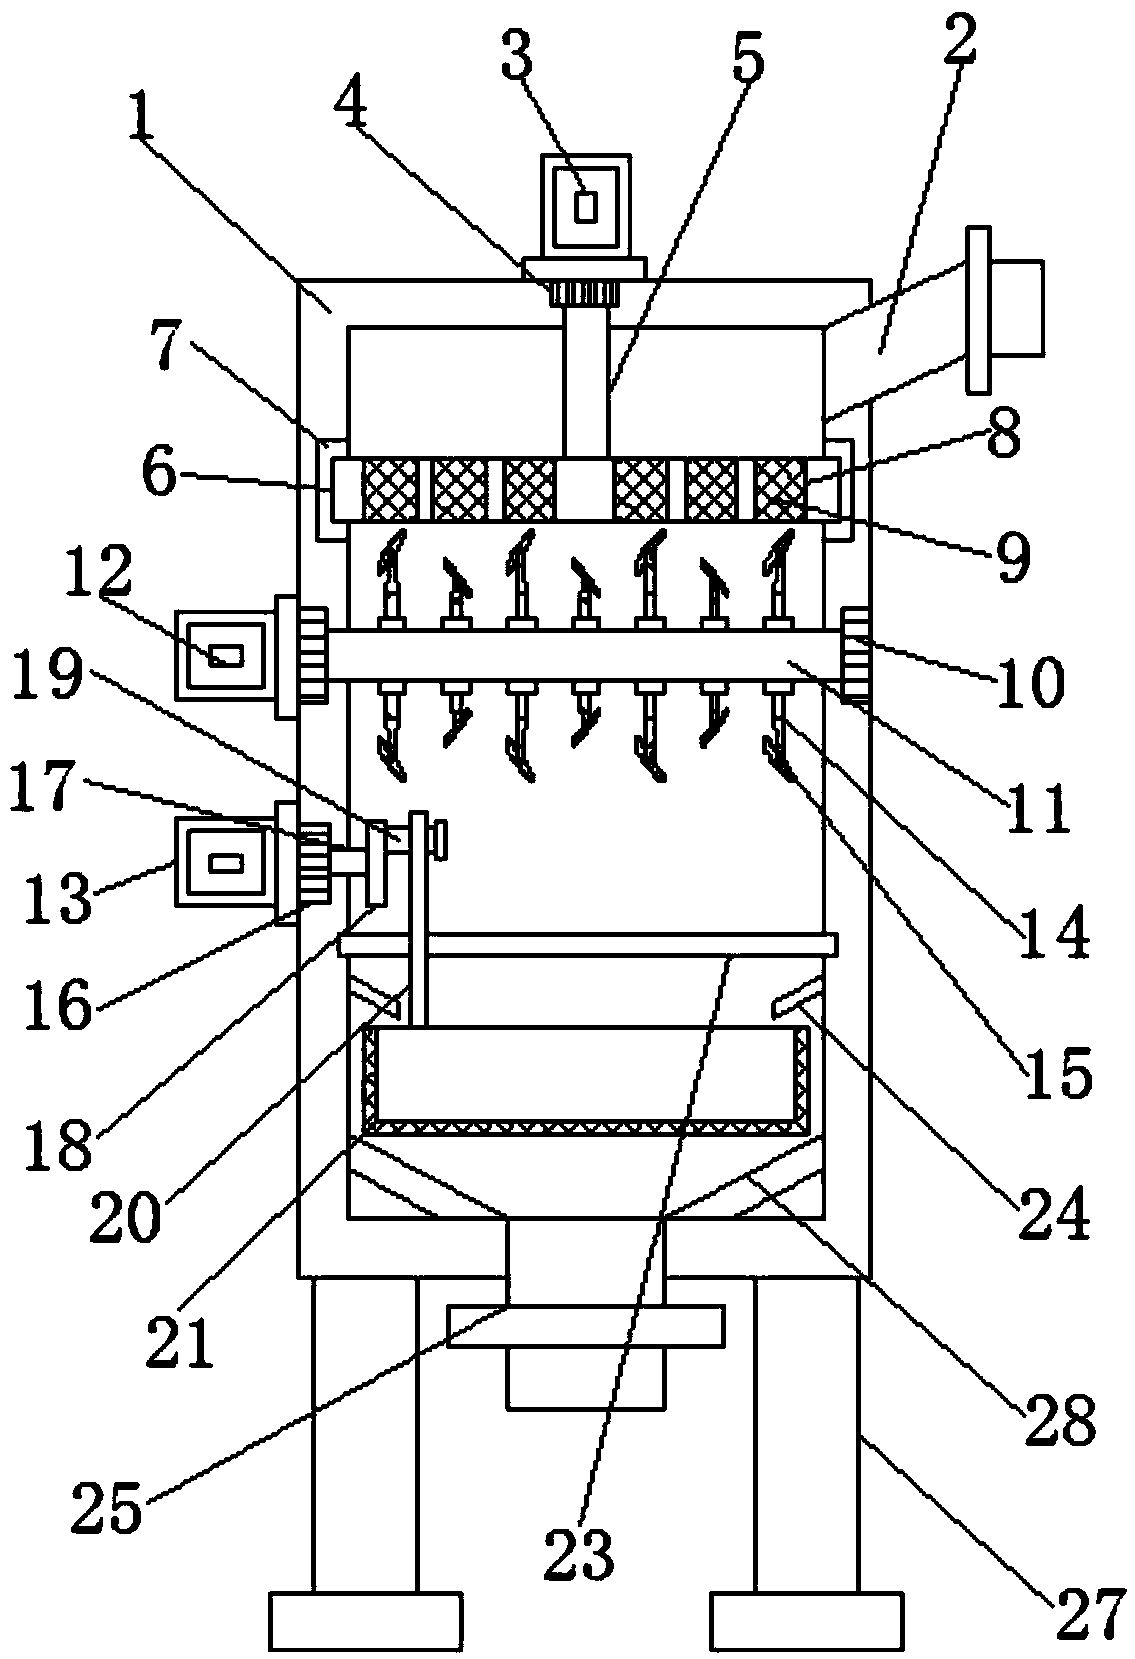 Flour filtering device for fine dried noodle production